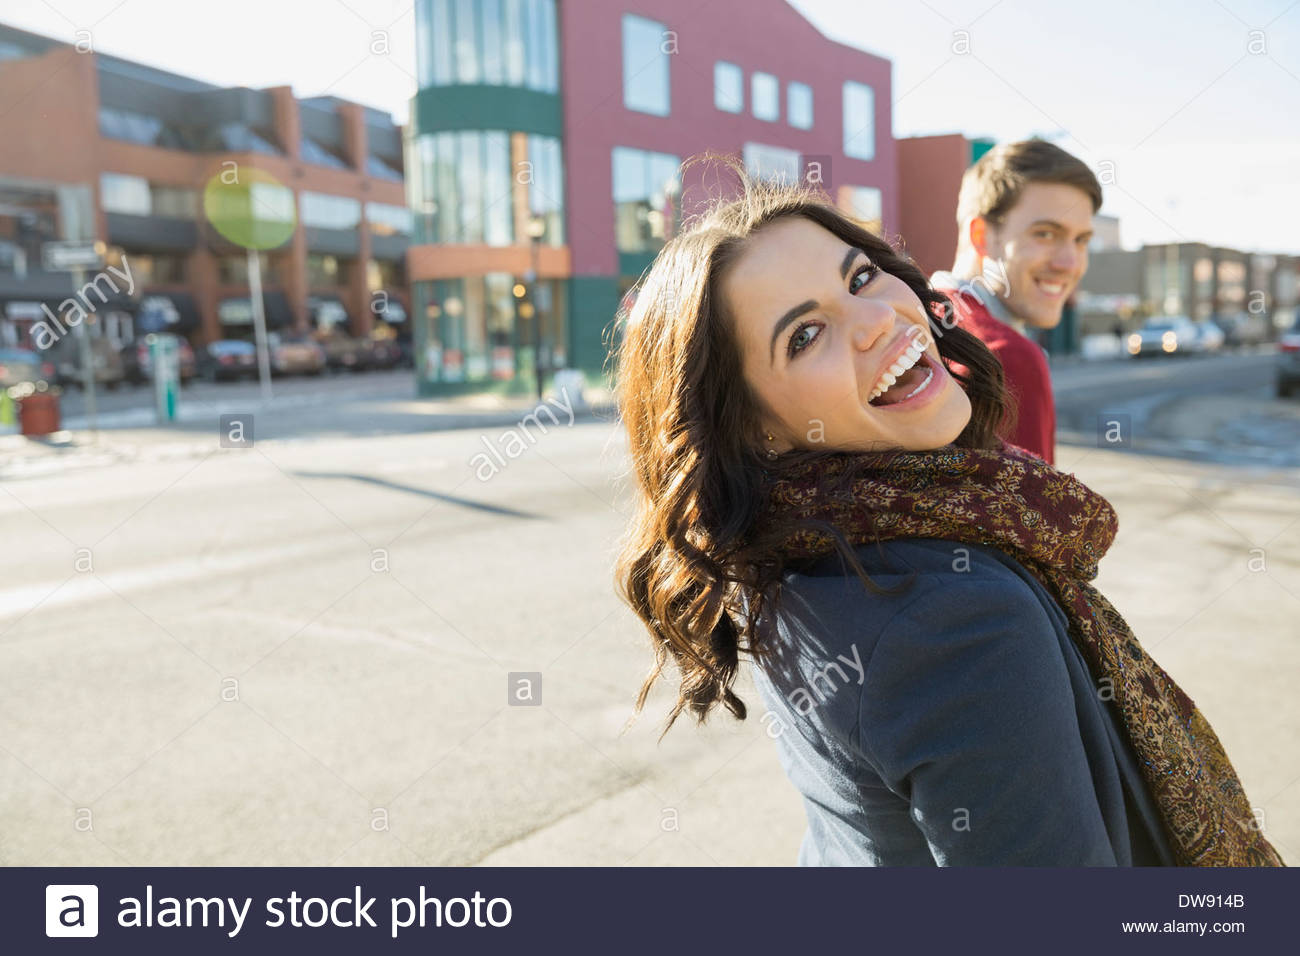 Cheerful woman looking back on city street Stock Photo